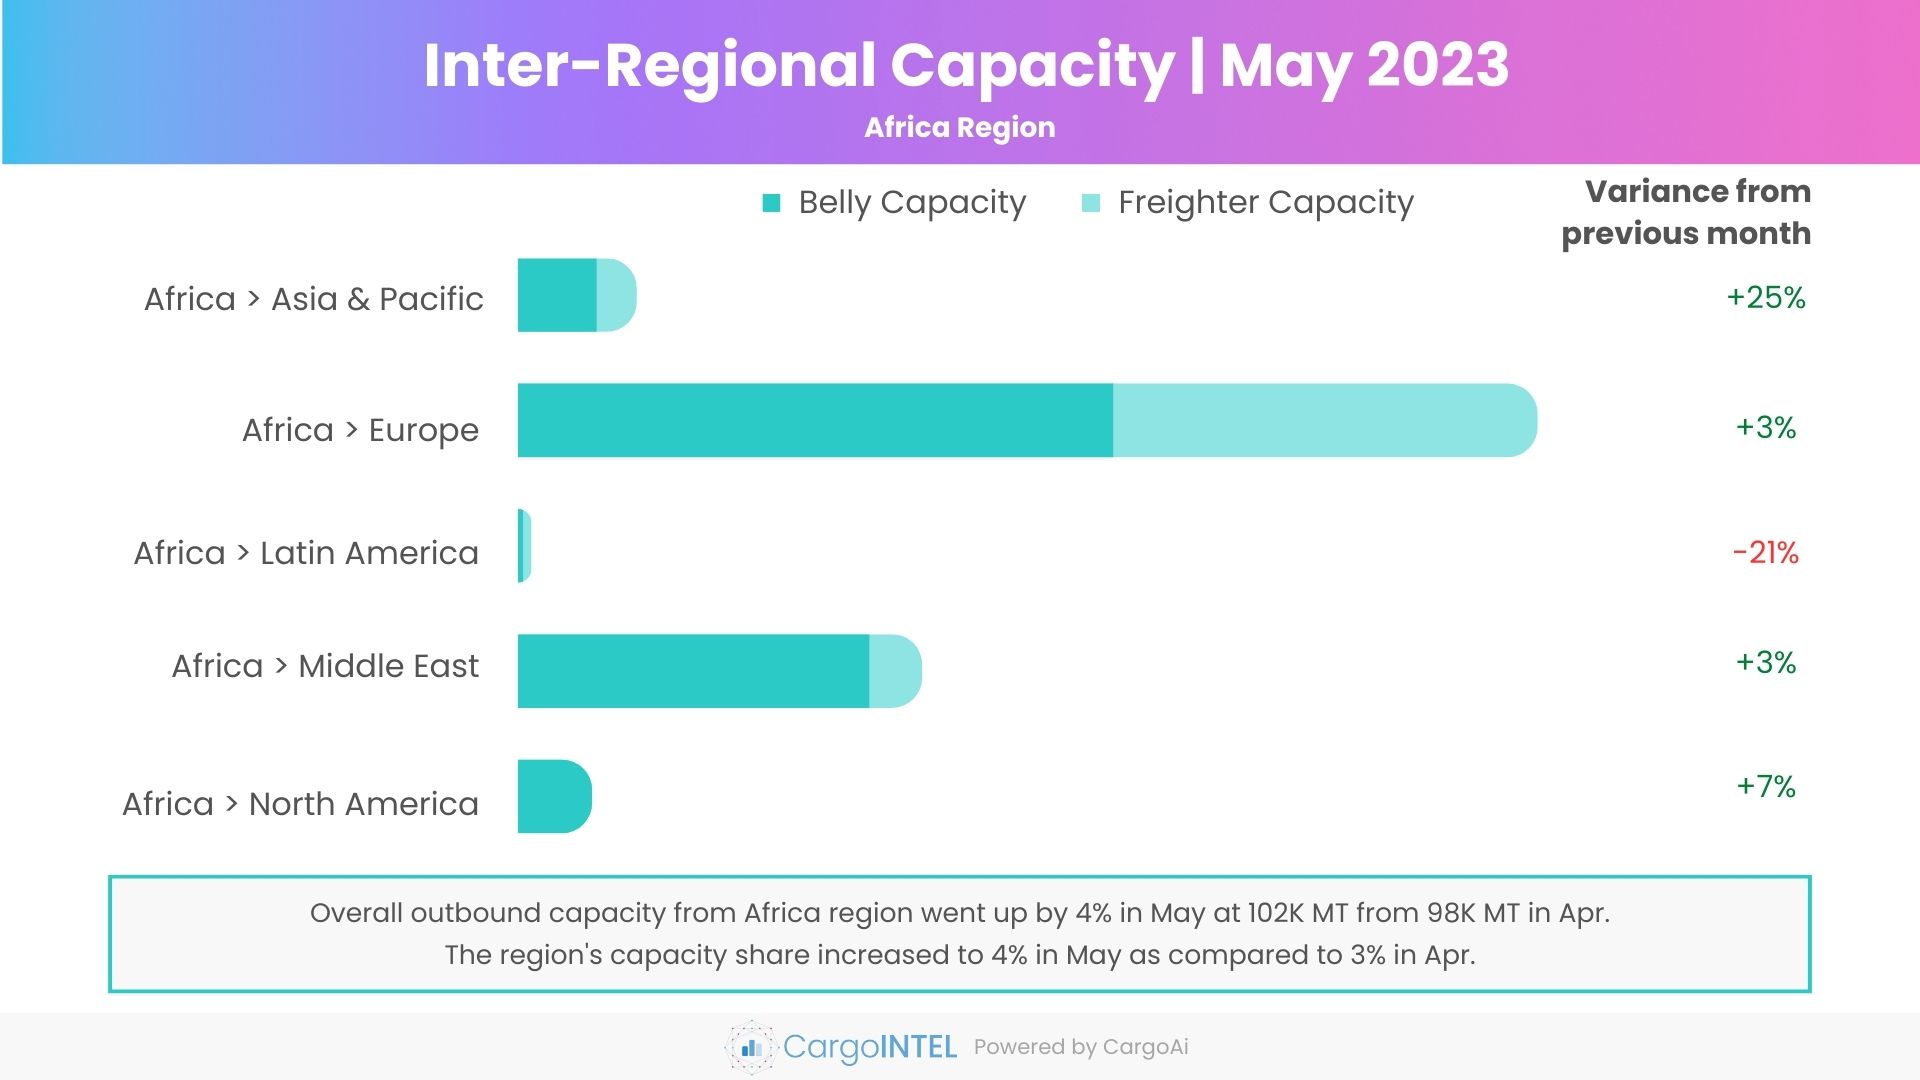 Air cargo capacity of Africa region of May 2023